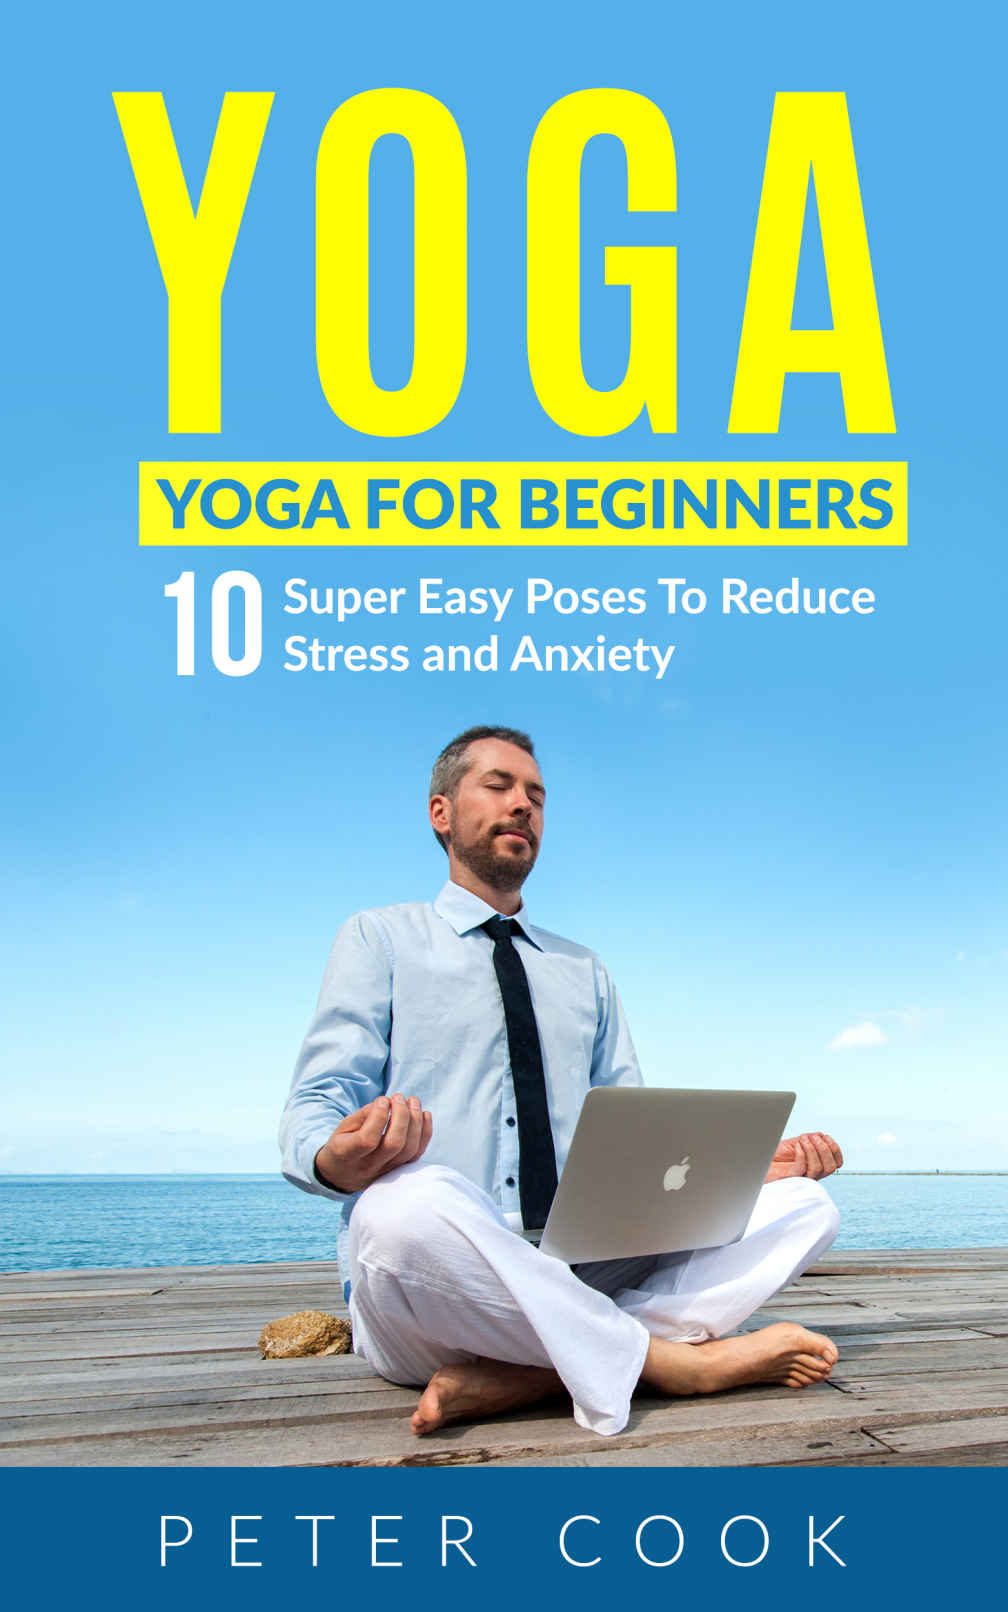 Yoga For Beginners 10 Super Easy Poses To Reduce Stress and Anxiety-CLASSIBLOGGER